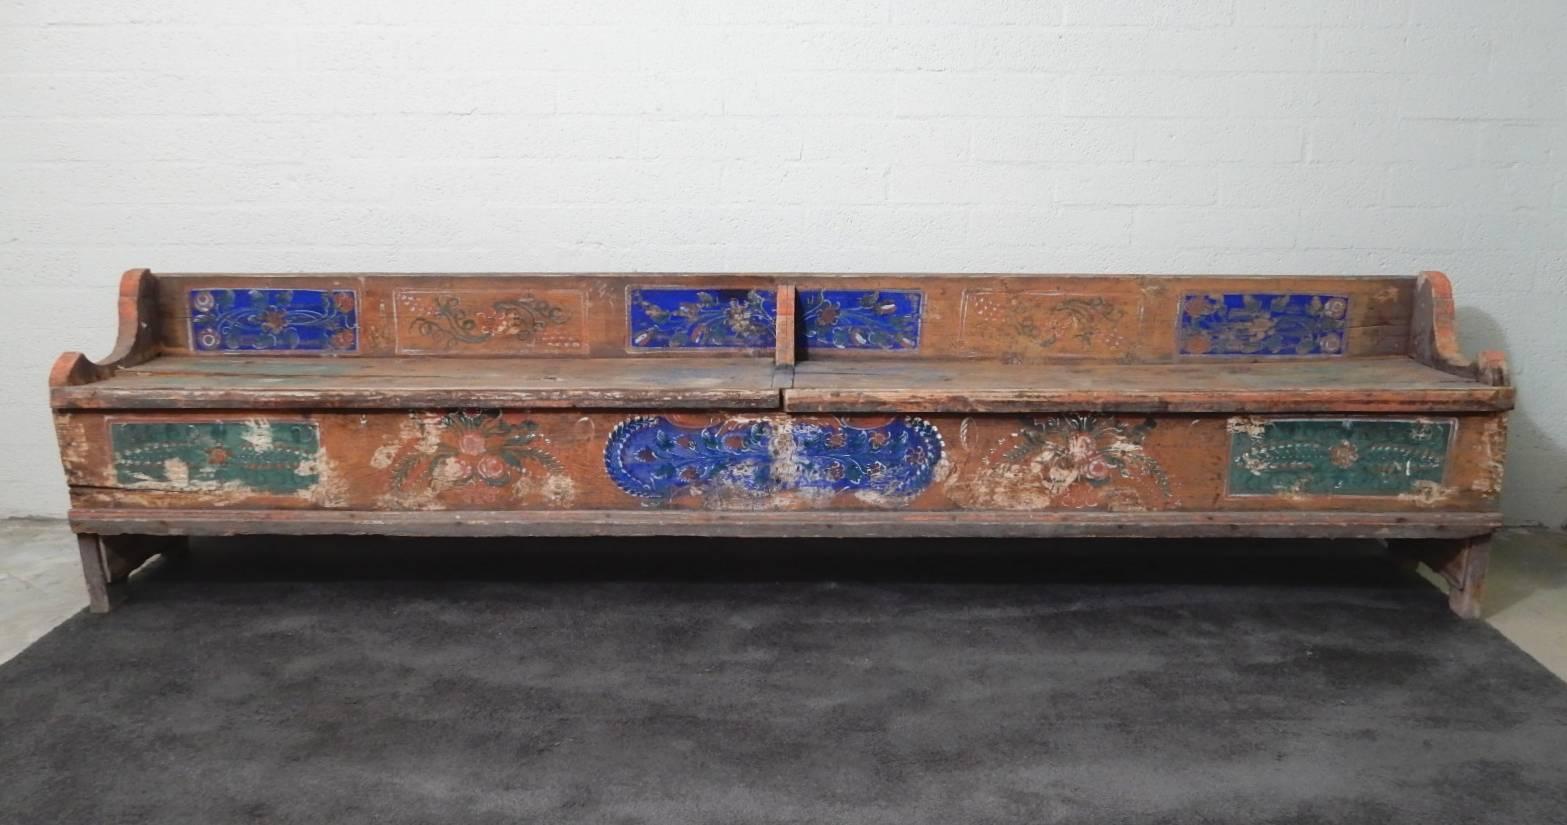 Antique storage bench from Sweden with original floral painting.
A rustic and primitive work of art.
Both seat planks lift up to expose open storage.
It is all original with hand-forged nails. Measures 10 feet long.